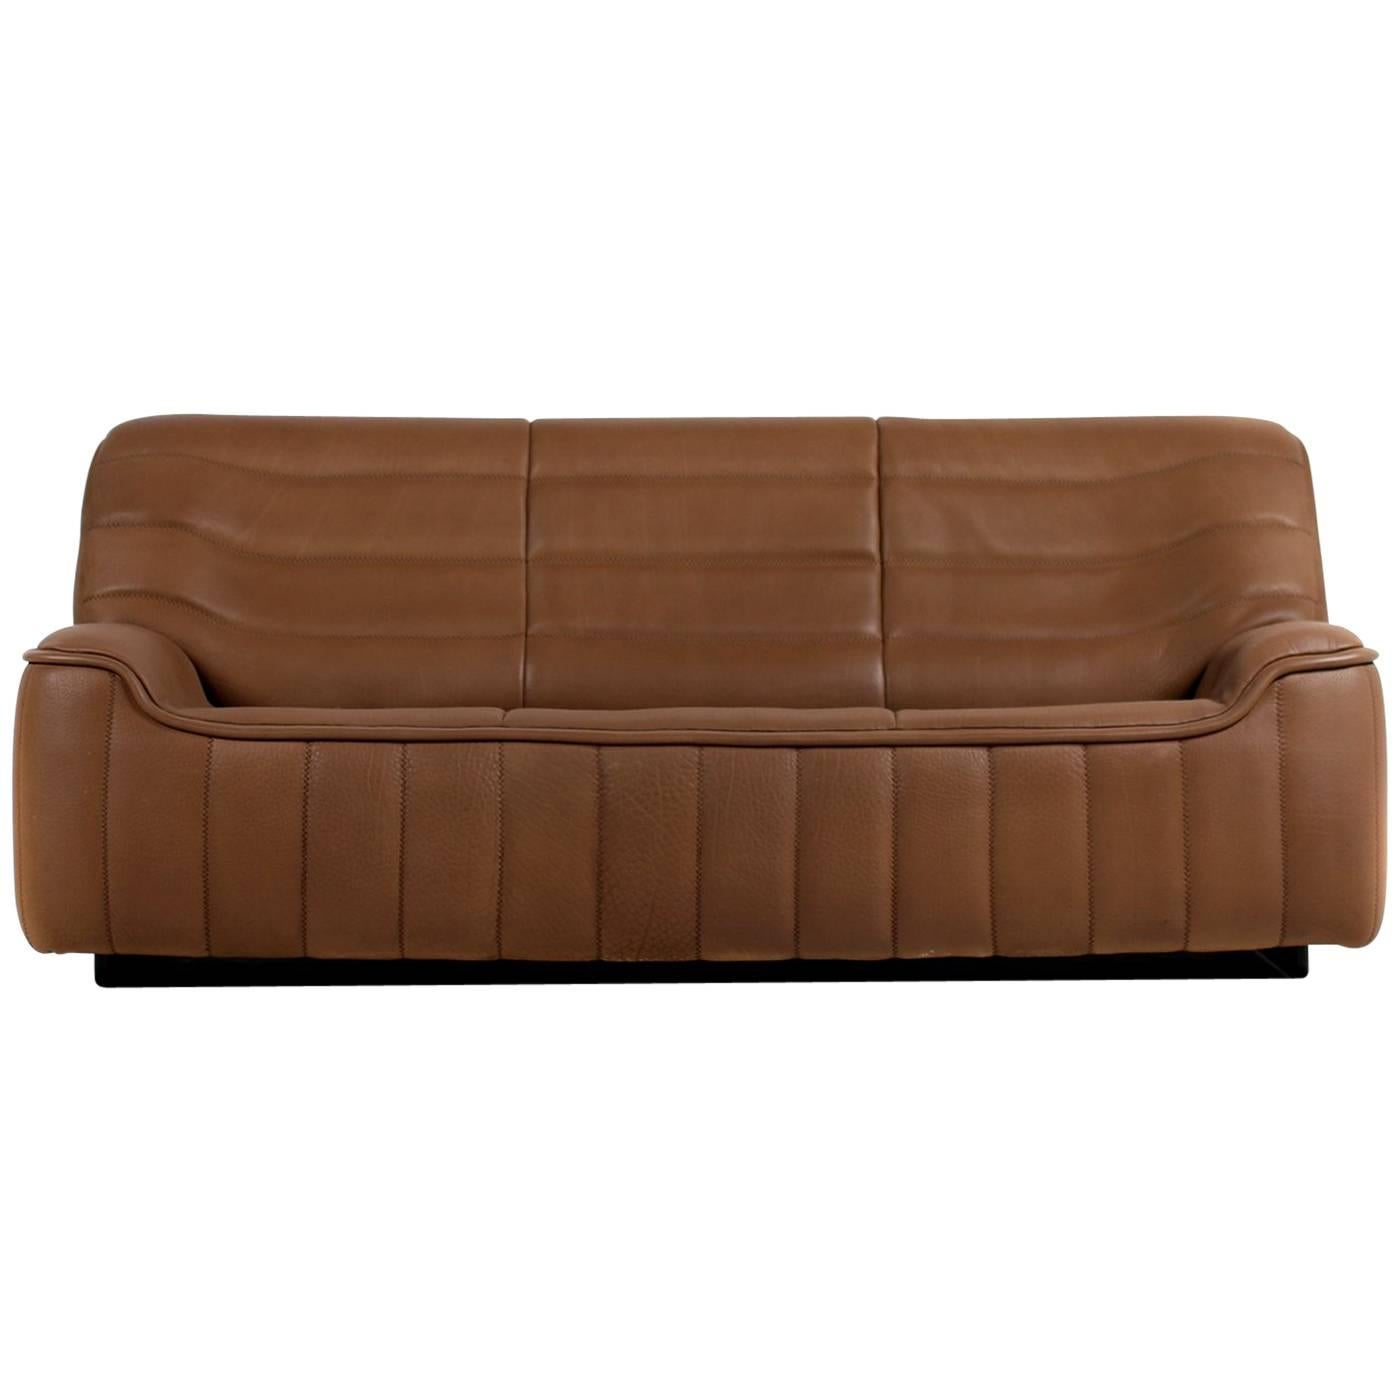 Beautiful and Rare 1970s De Sede DS 84 Buffalo Leather Sofa in Brown